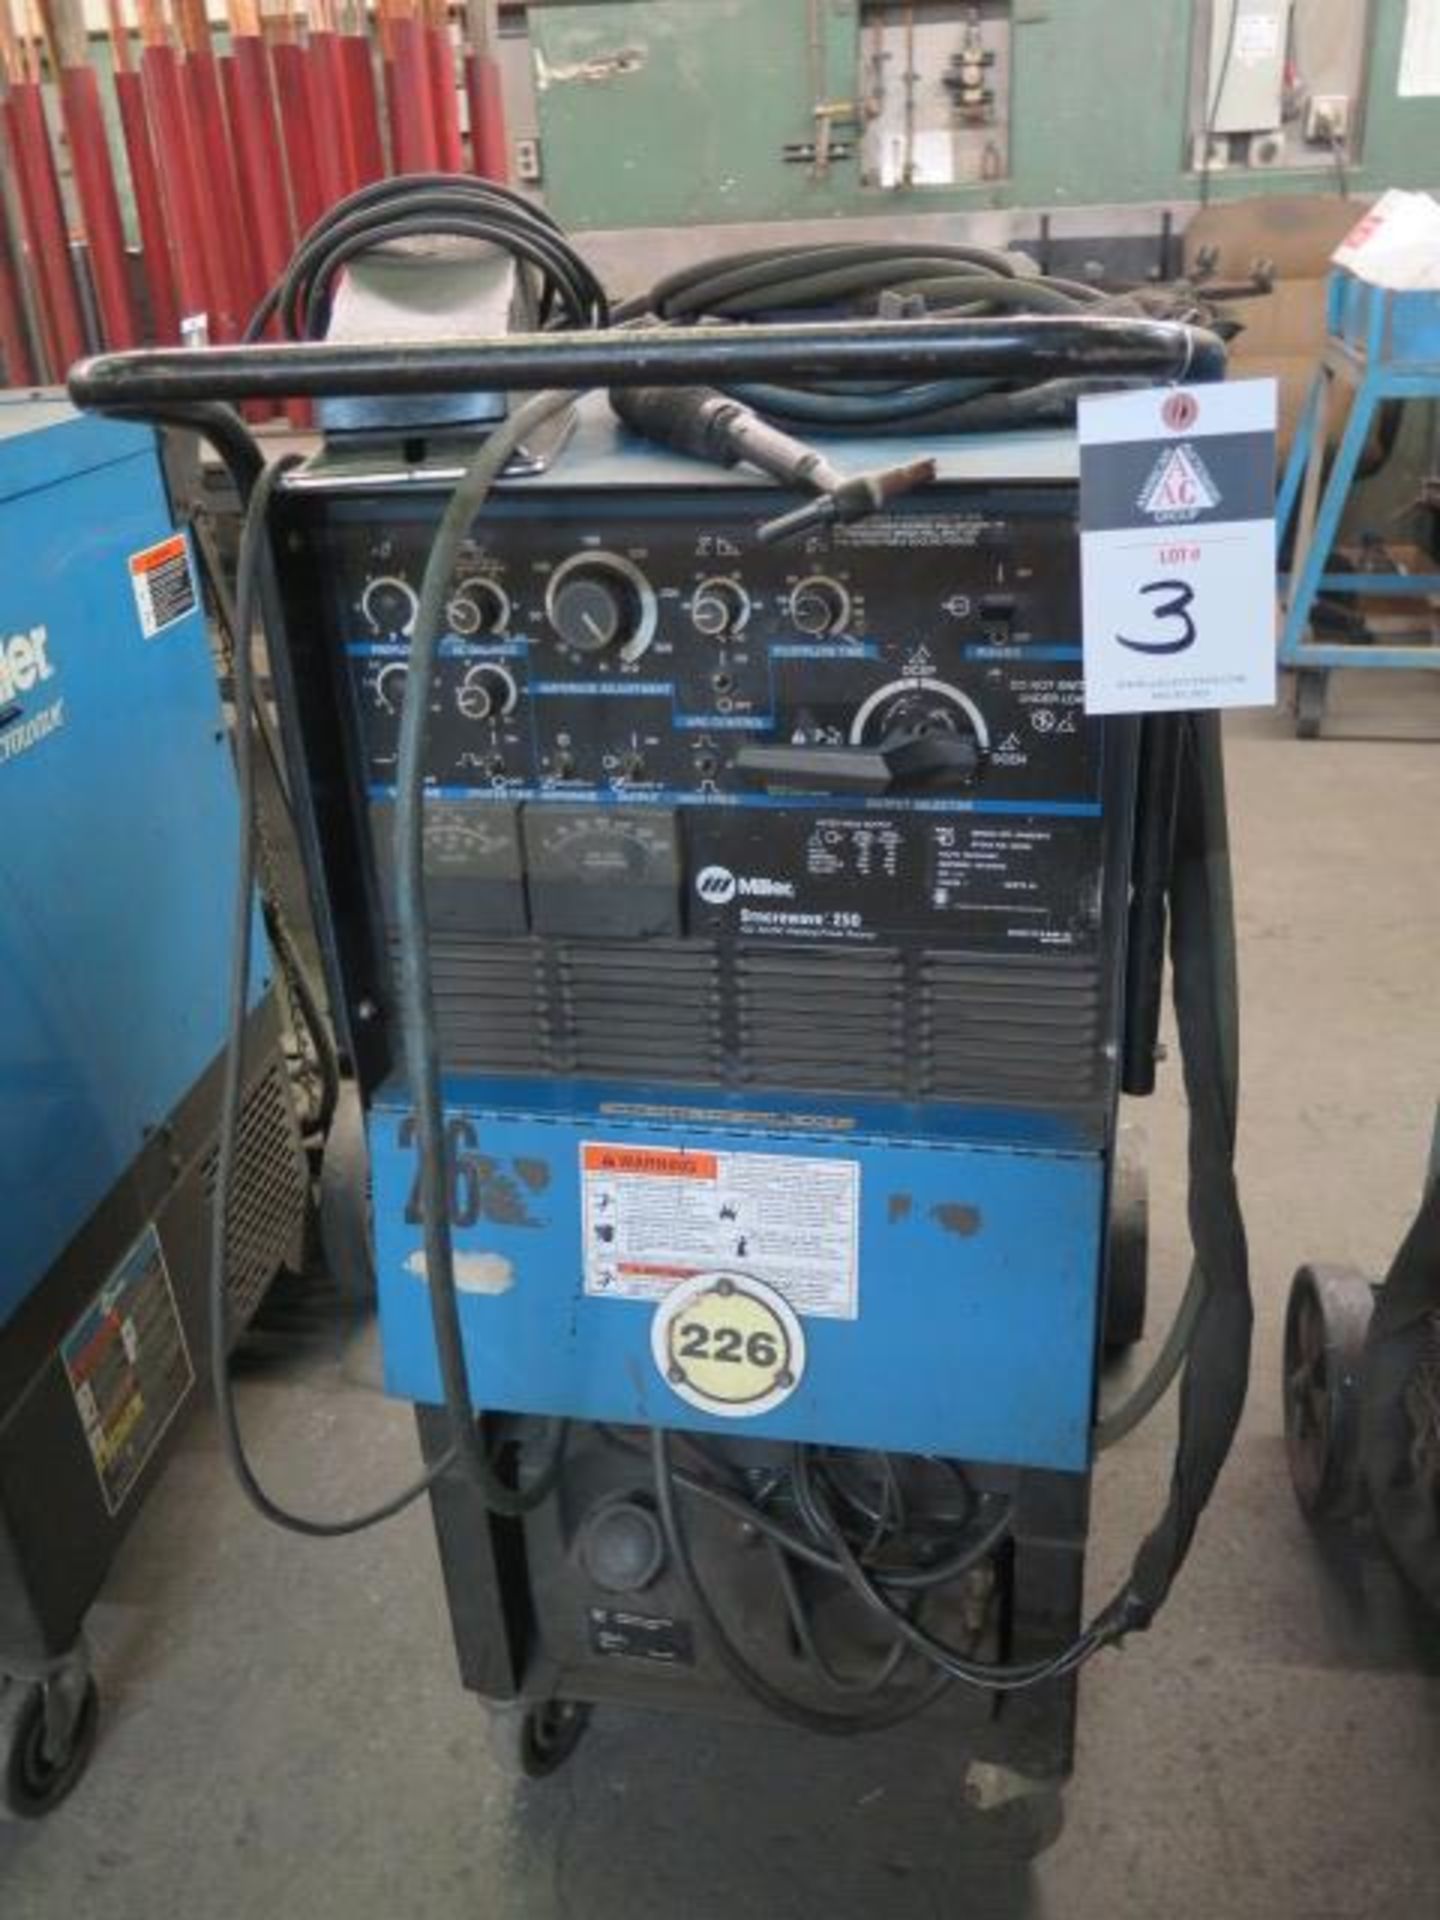 Miller Syncrowave 250 CC-AC/DC Arc welding Power Source s/n KH483474 w/ Cooler Cart SOLD AS-IS